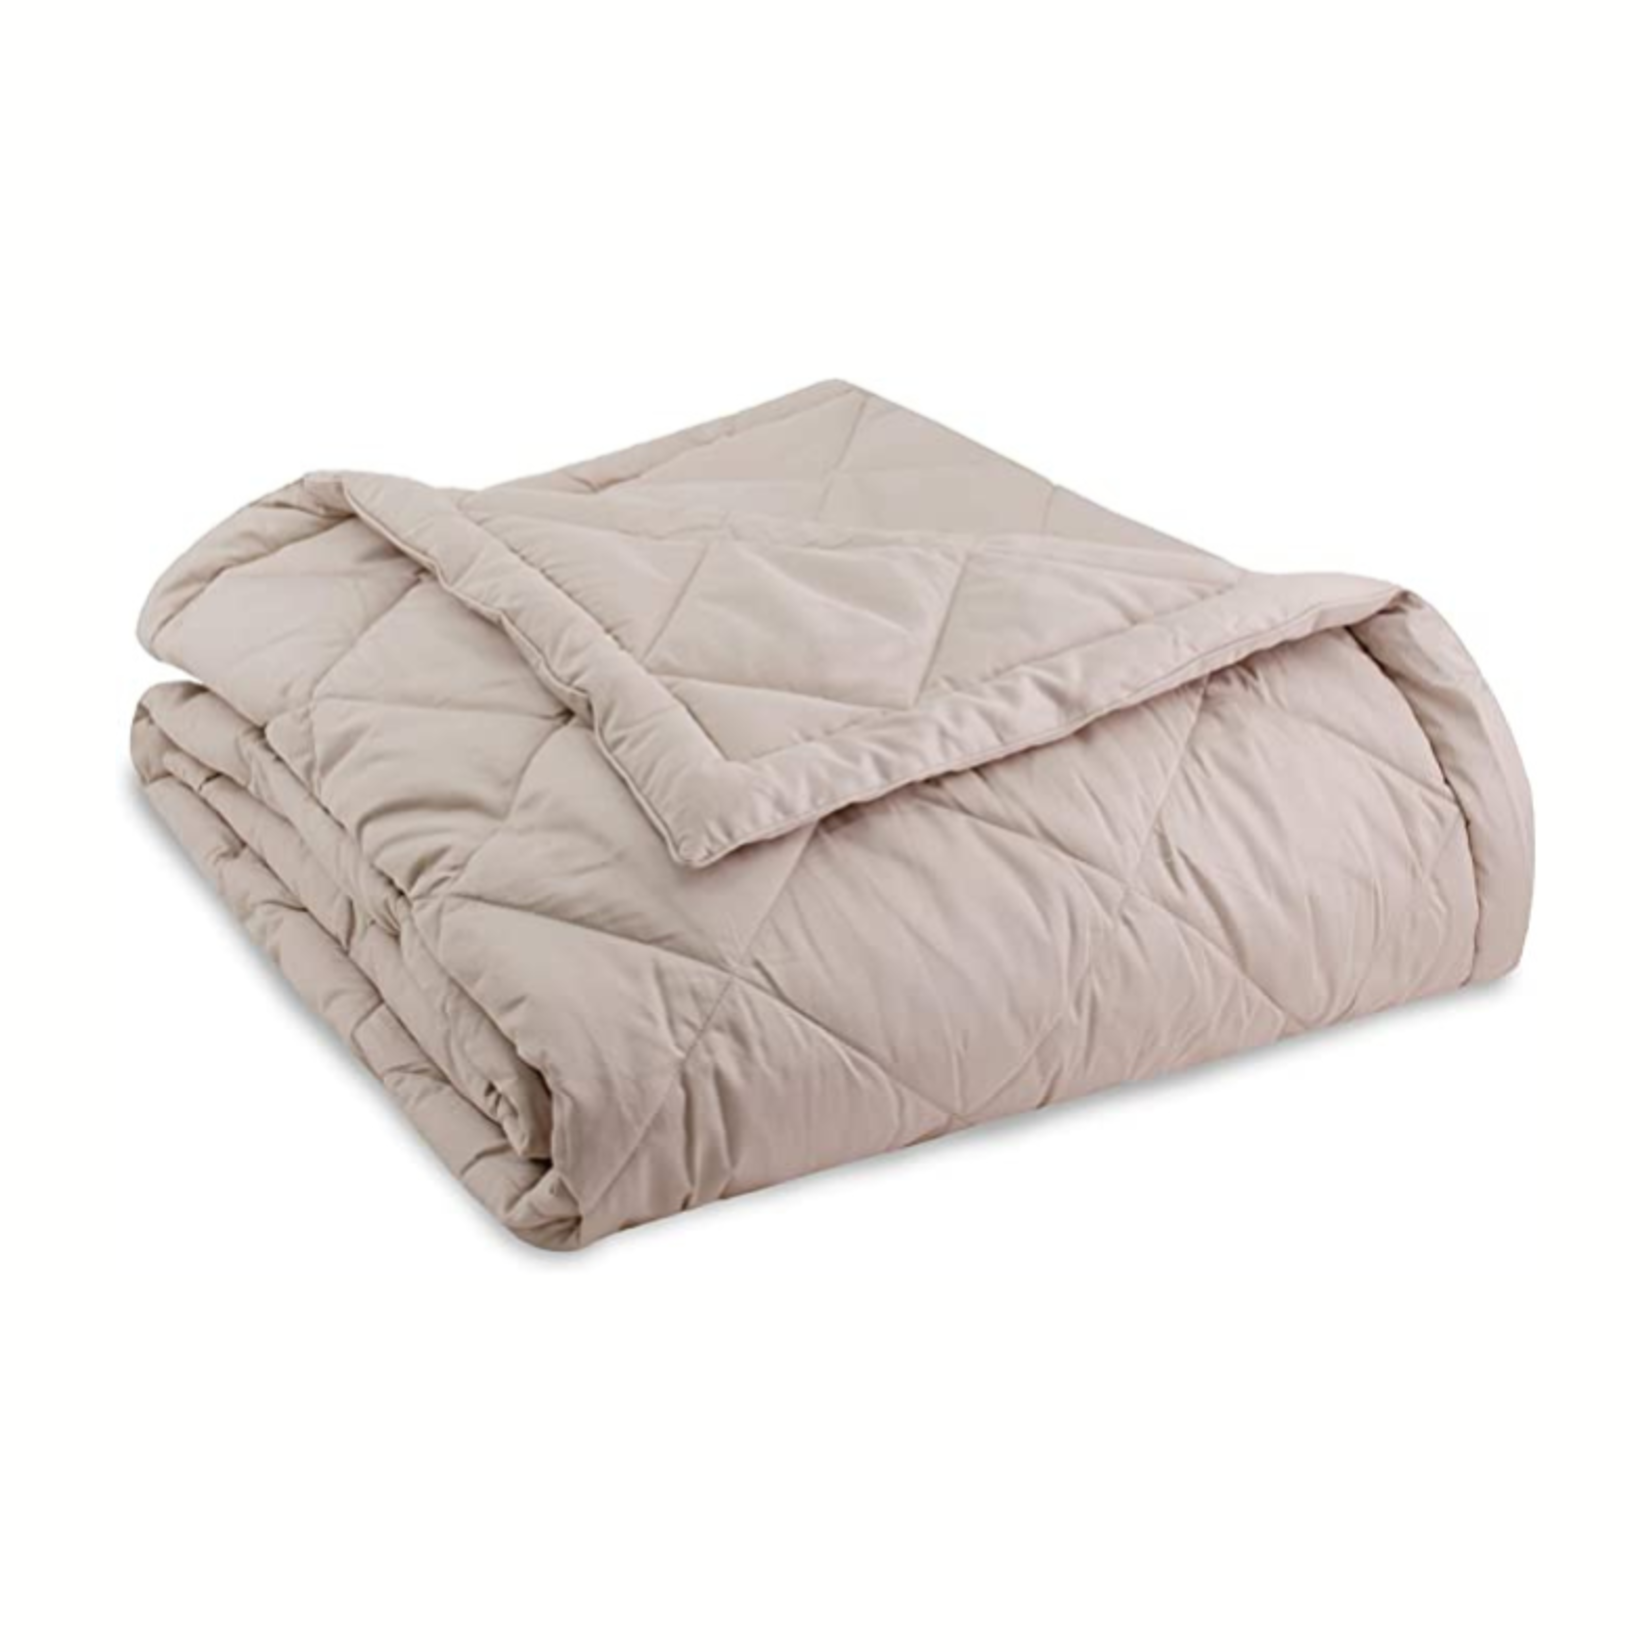 Serta 300 Thread Count Down Alternative Quilted Bed Blanket - King - Linen